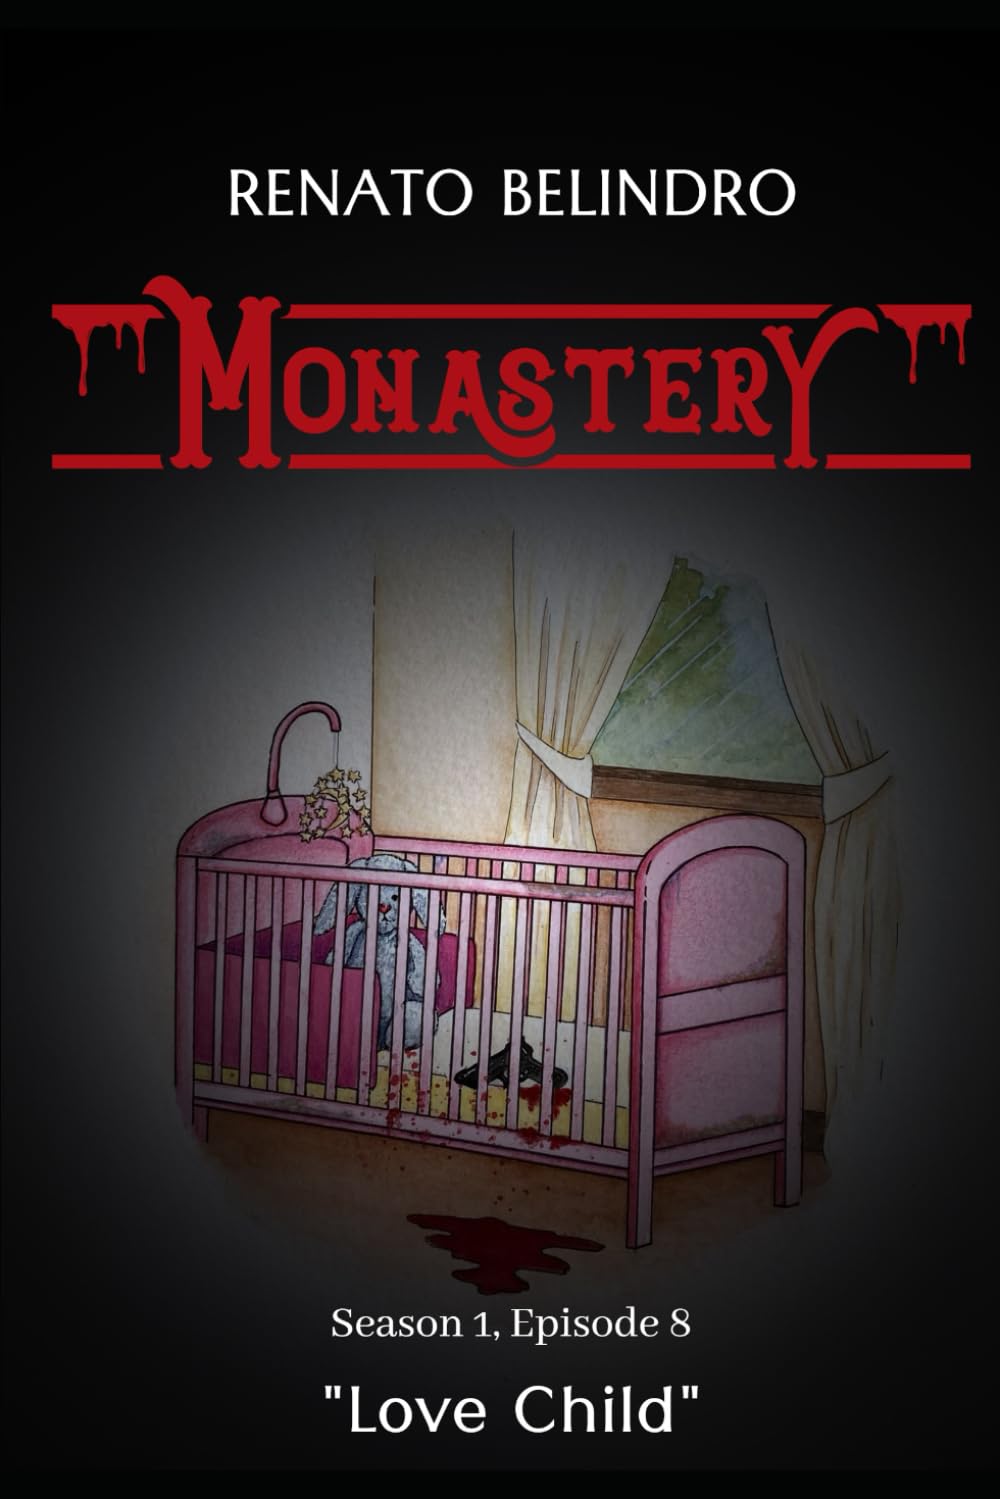 We see a pink crib with childrens' toys inside. There is blood on the crib. We see Monastery in red font above it.